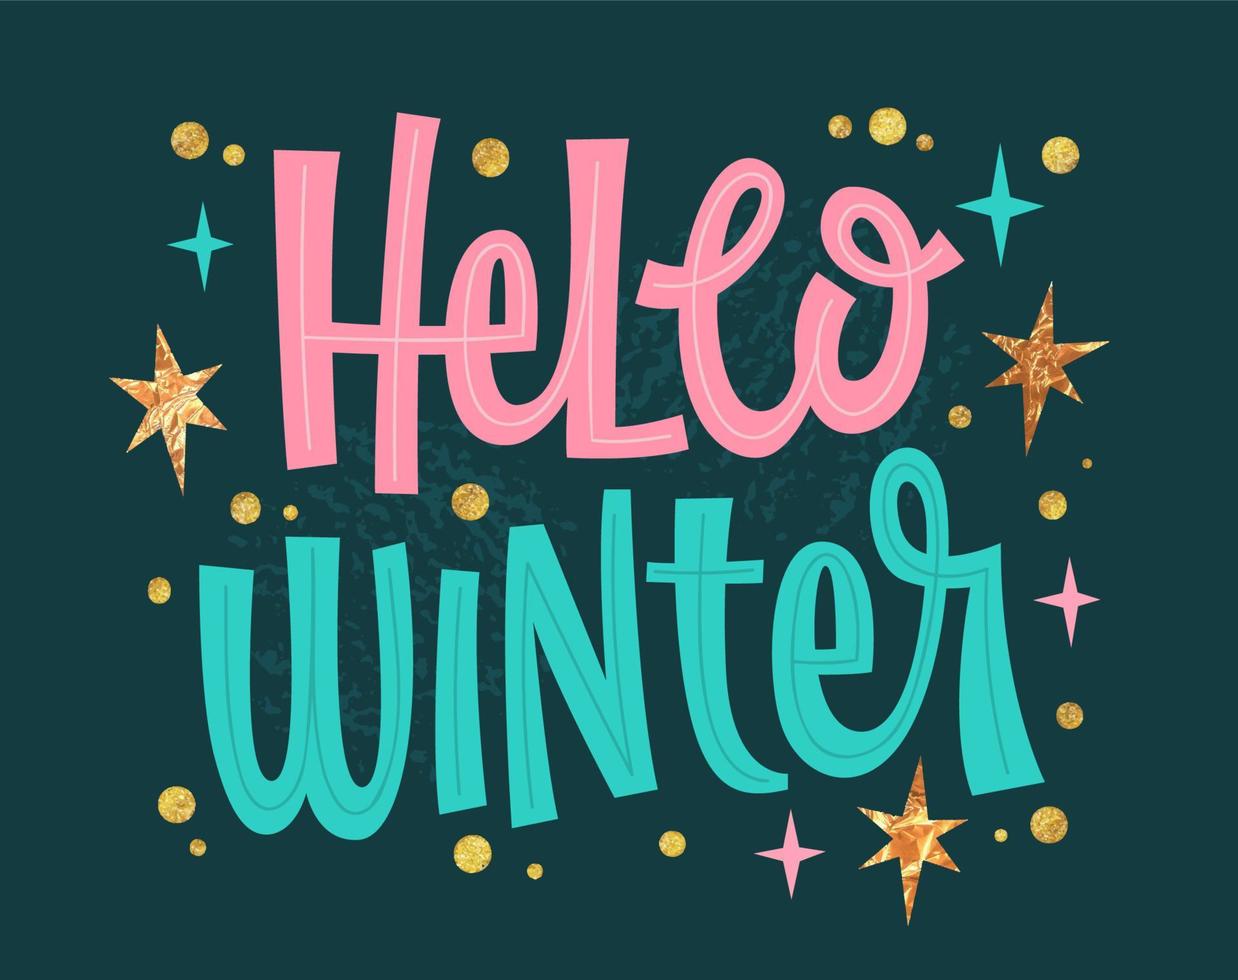 Festive modern vector lettering phrase illustration, Hello winter. Trendy pink, green, gold colors typography design for winter themed events.